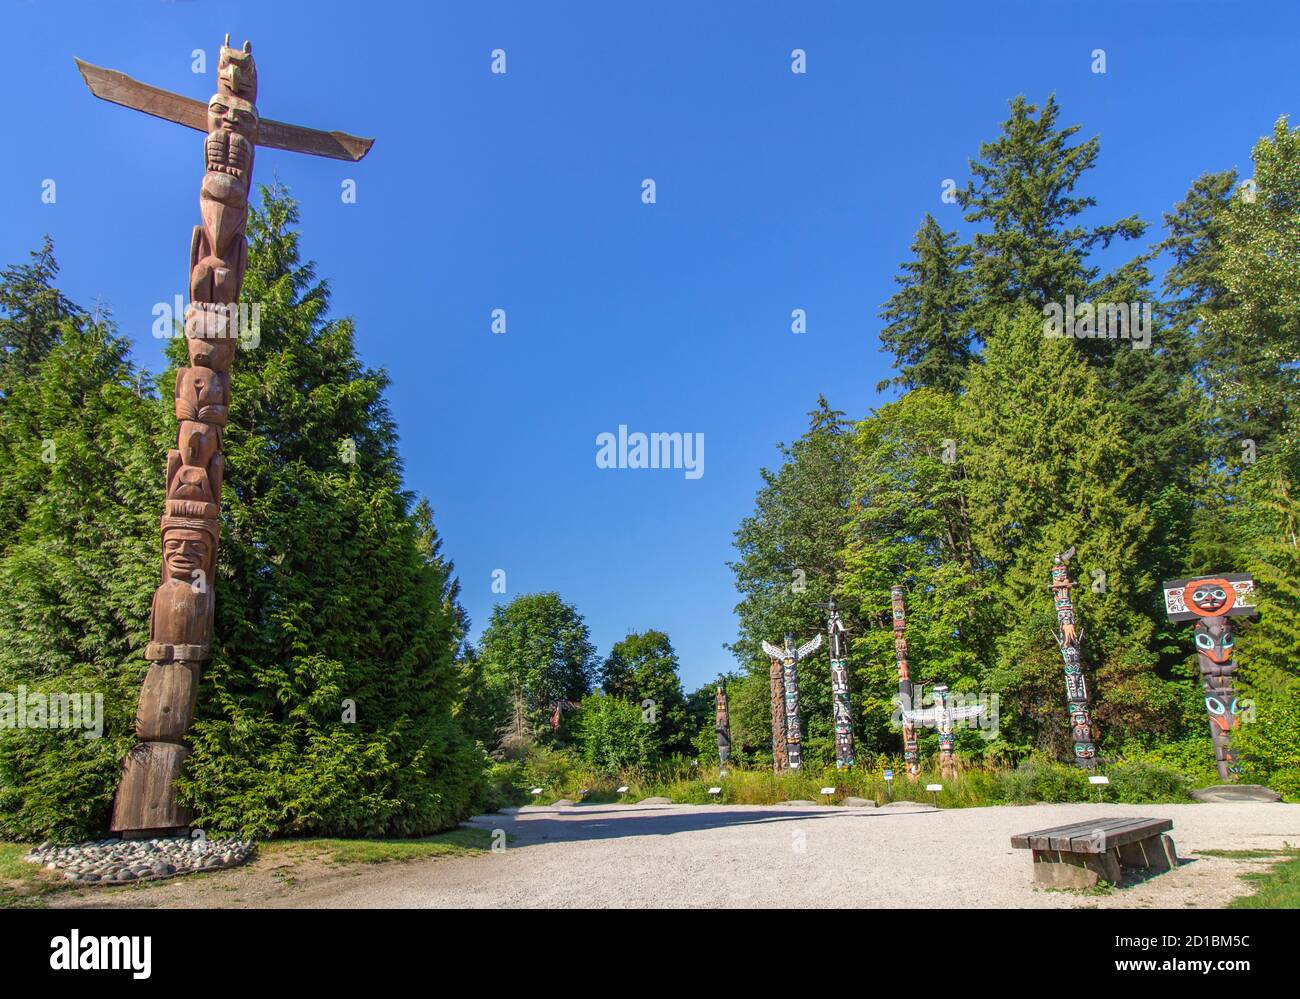 The famous Indigenous / Native artwork in Stanley park, Vancouver, BC. The entrance pole and seven monumental wooden carved and painted totem poles. Stock Photo